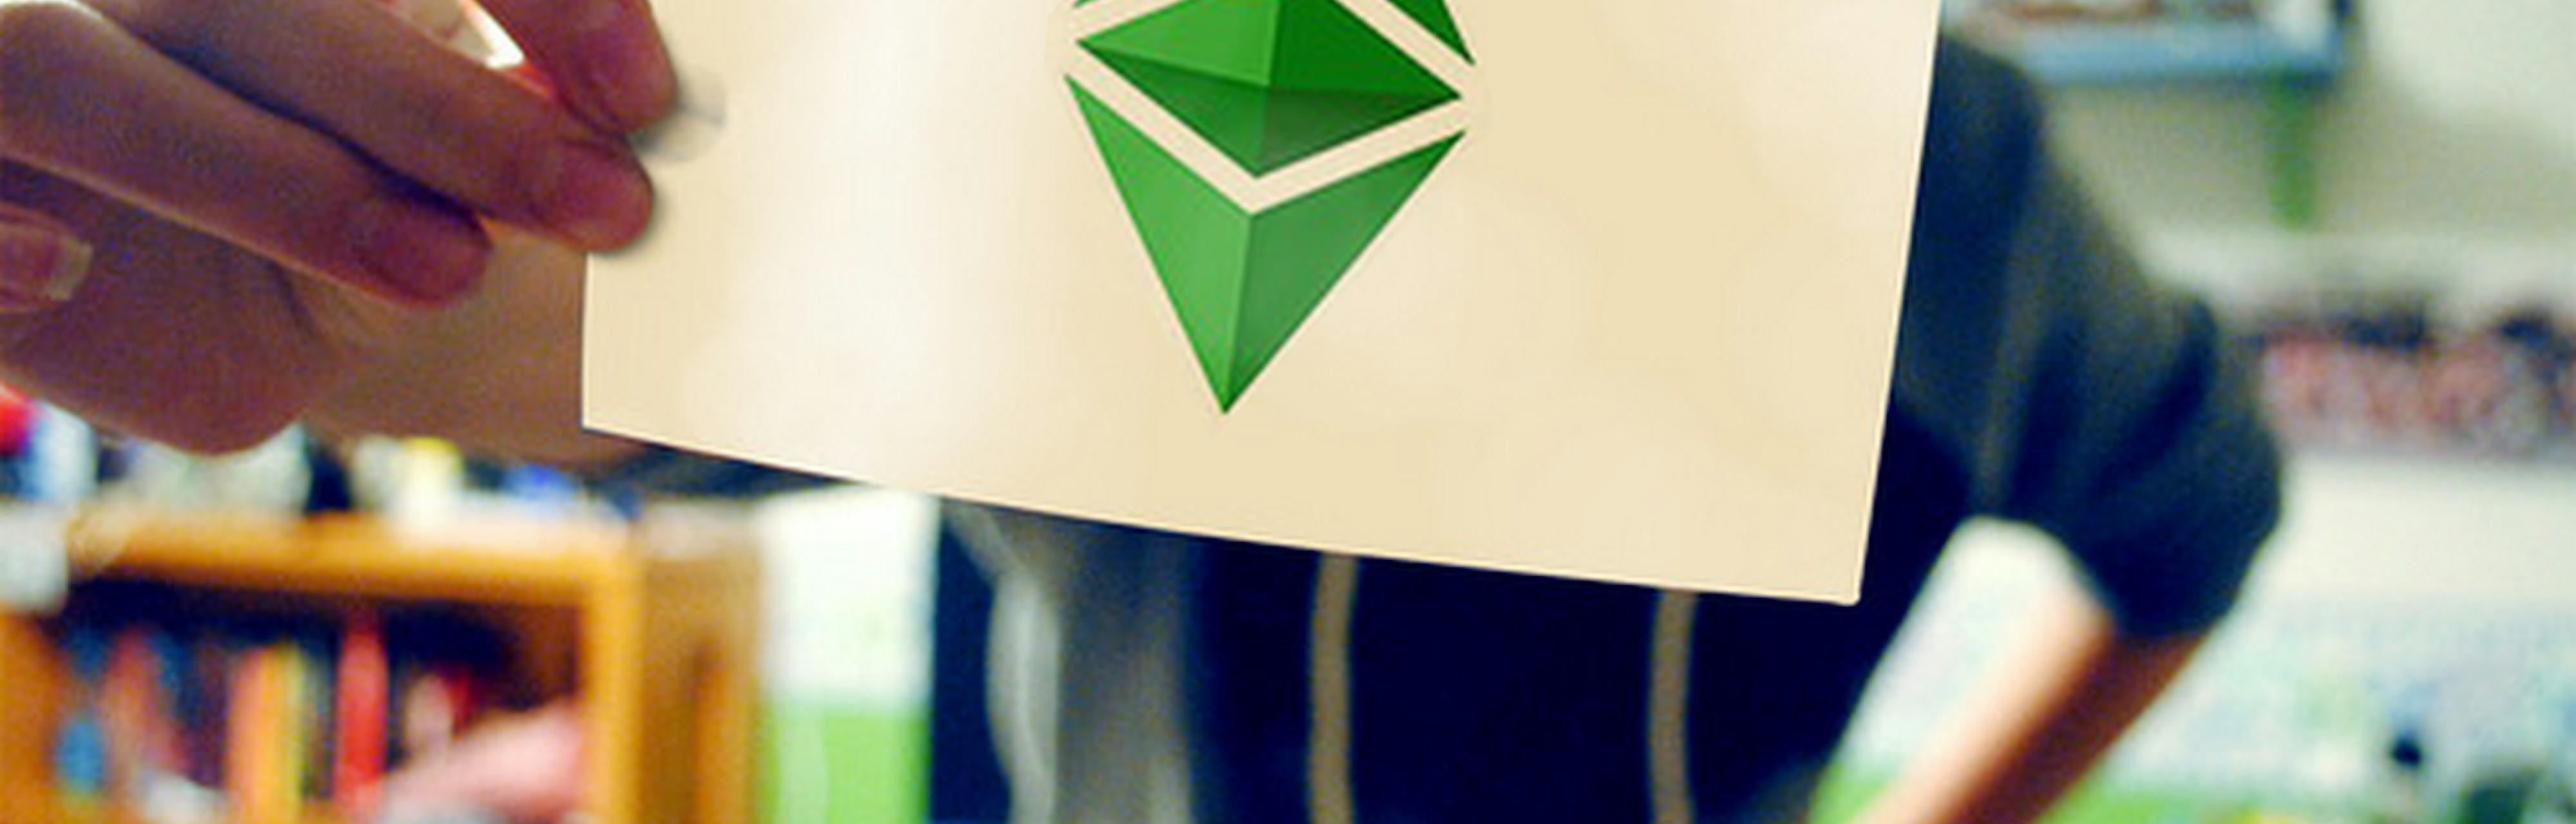 Ethereum Price is Dropping, but Coinbase Reveal Could ...